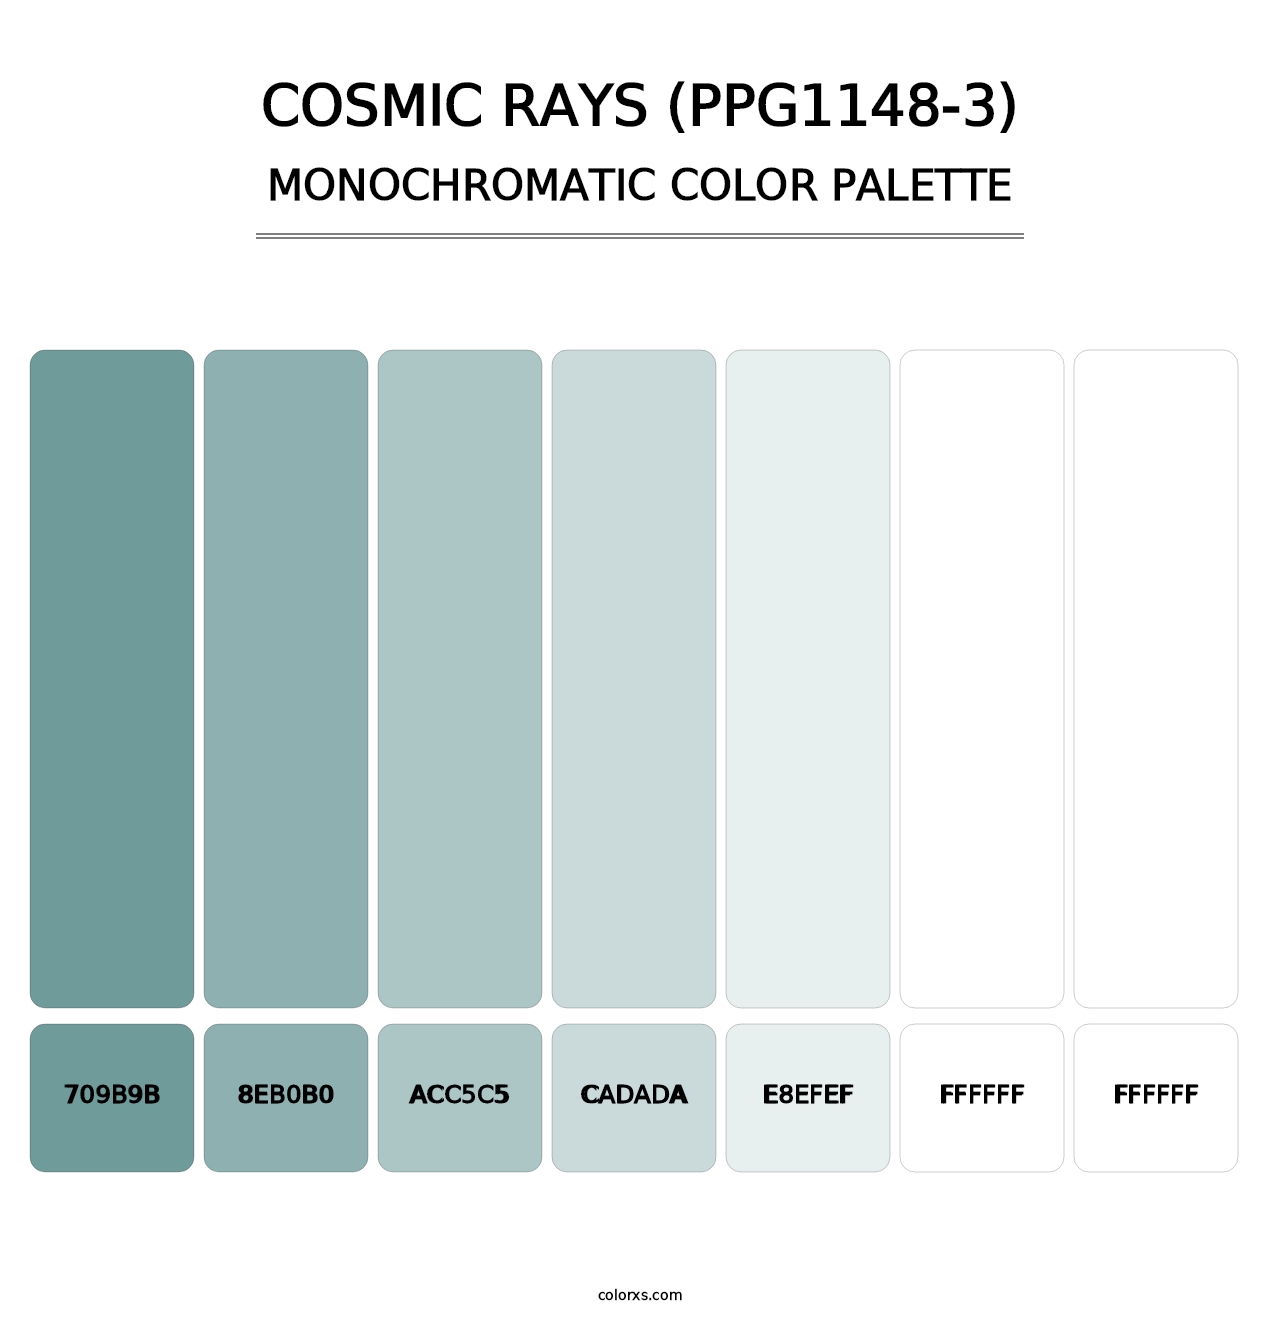 Cosmic Rays (PPG1148-3) - Monochromatic Color Palette